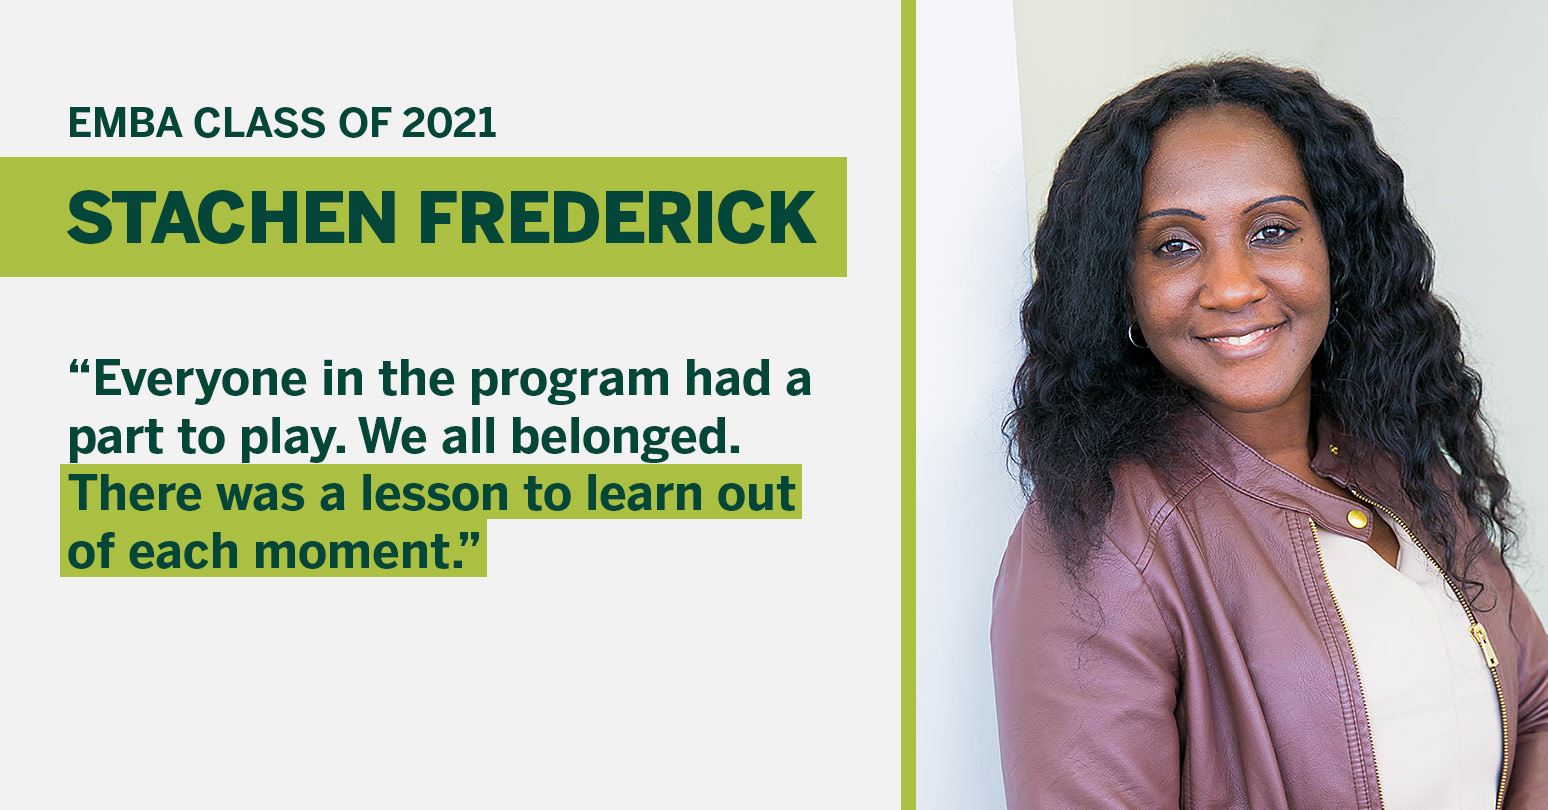 EMBA Class of 2021 Stachen Frederick "Everyone in the program had a part to play. We all belonged. There was a lesson to learn out of each moment."